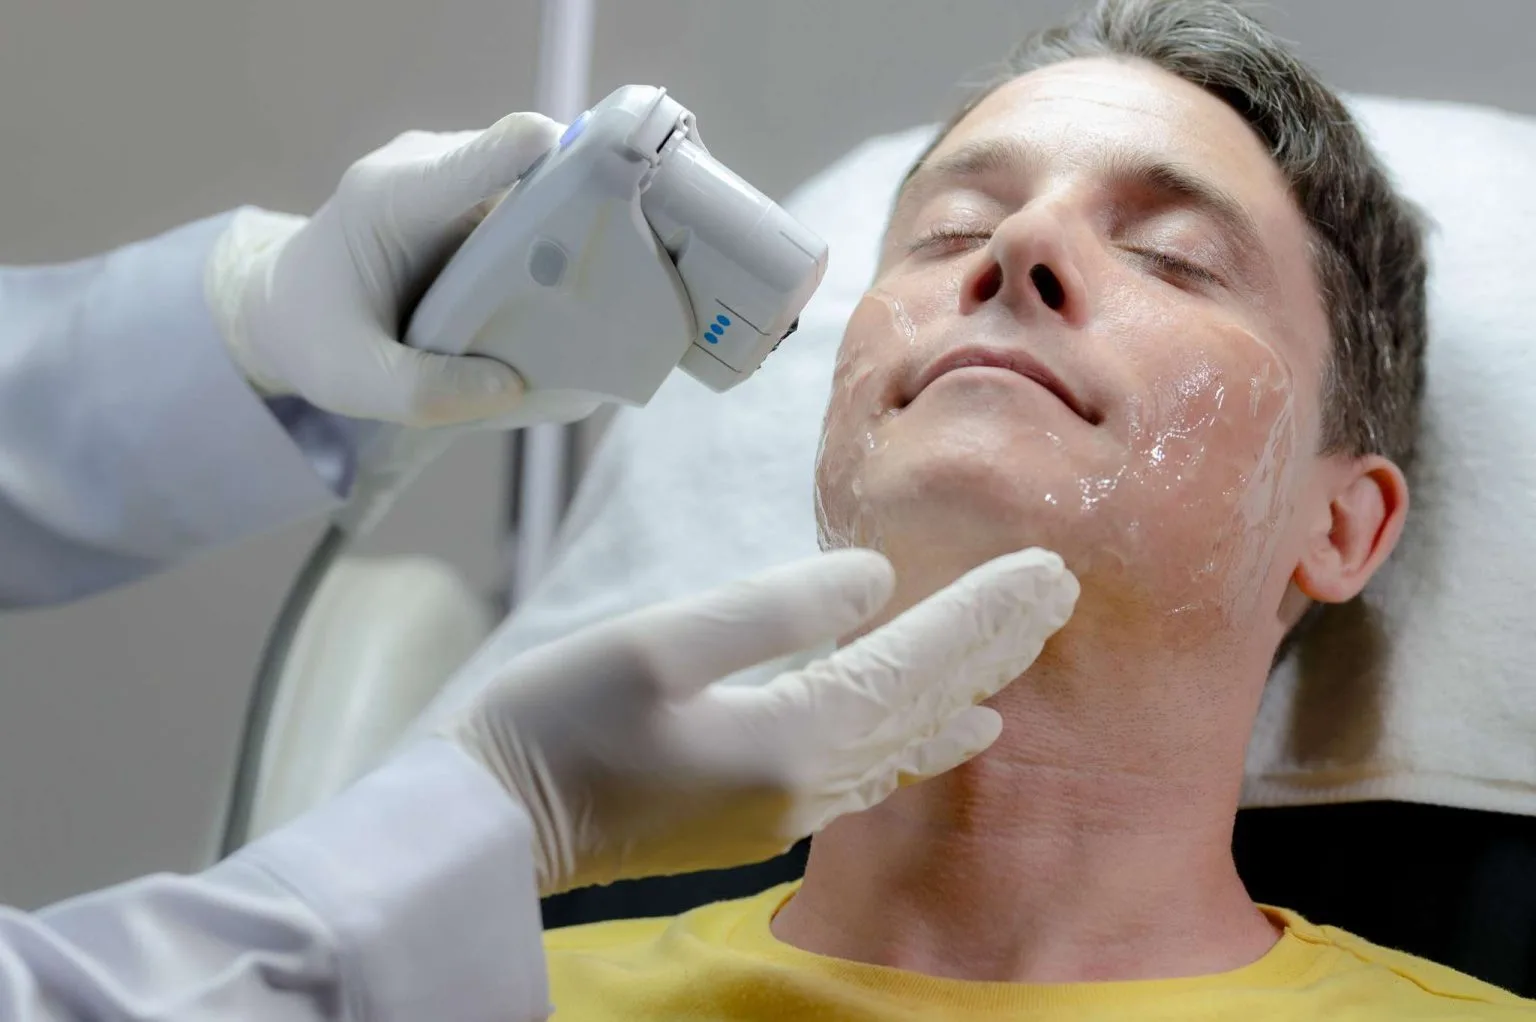 a white man gets a laser facial by a specialist 2022 09 21 19 42 23 utc 2048x1362 1 1536x1022 1